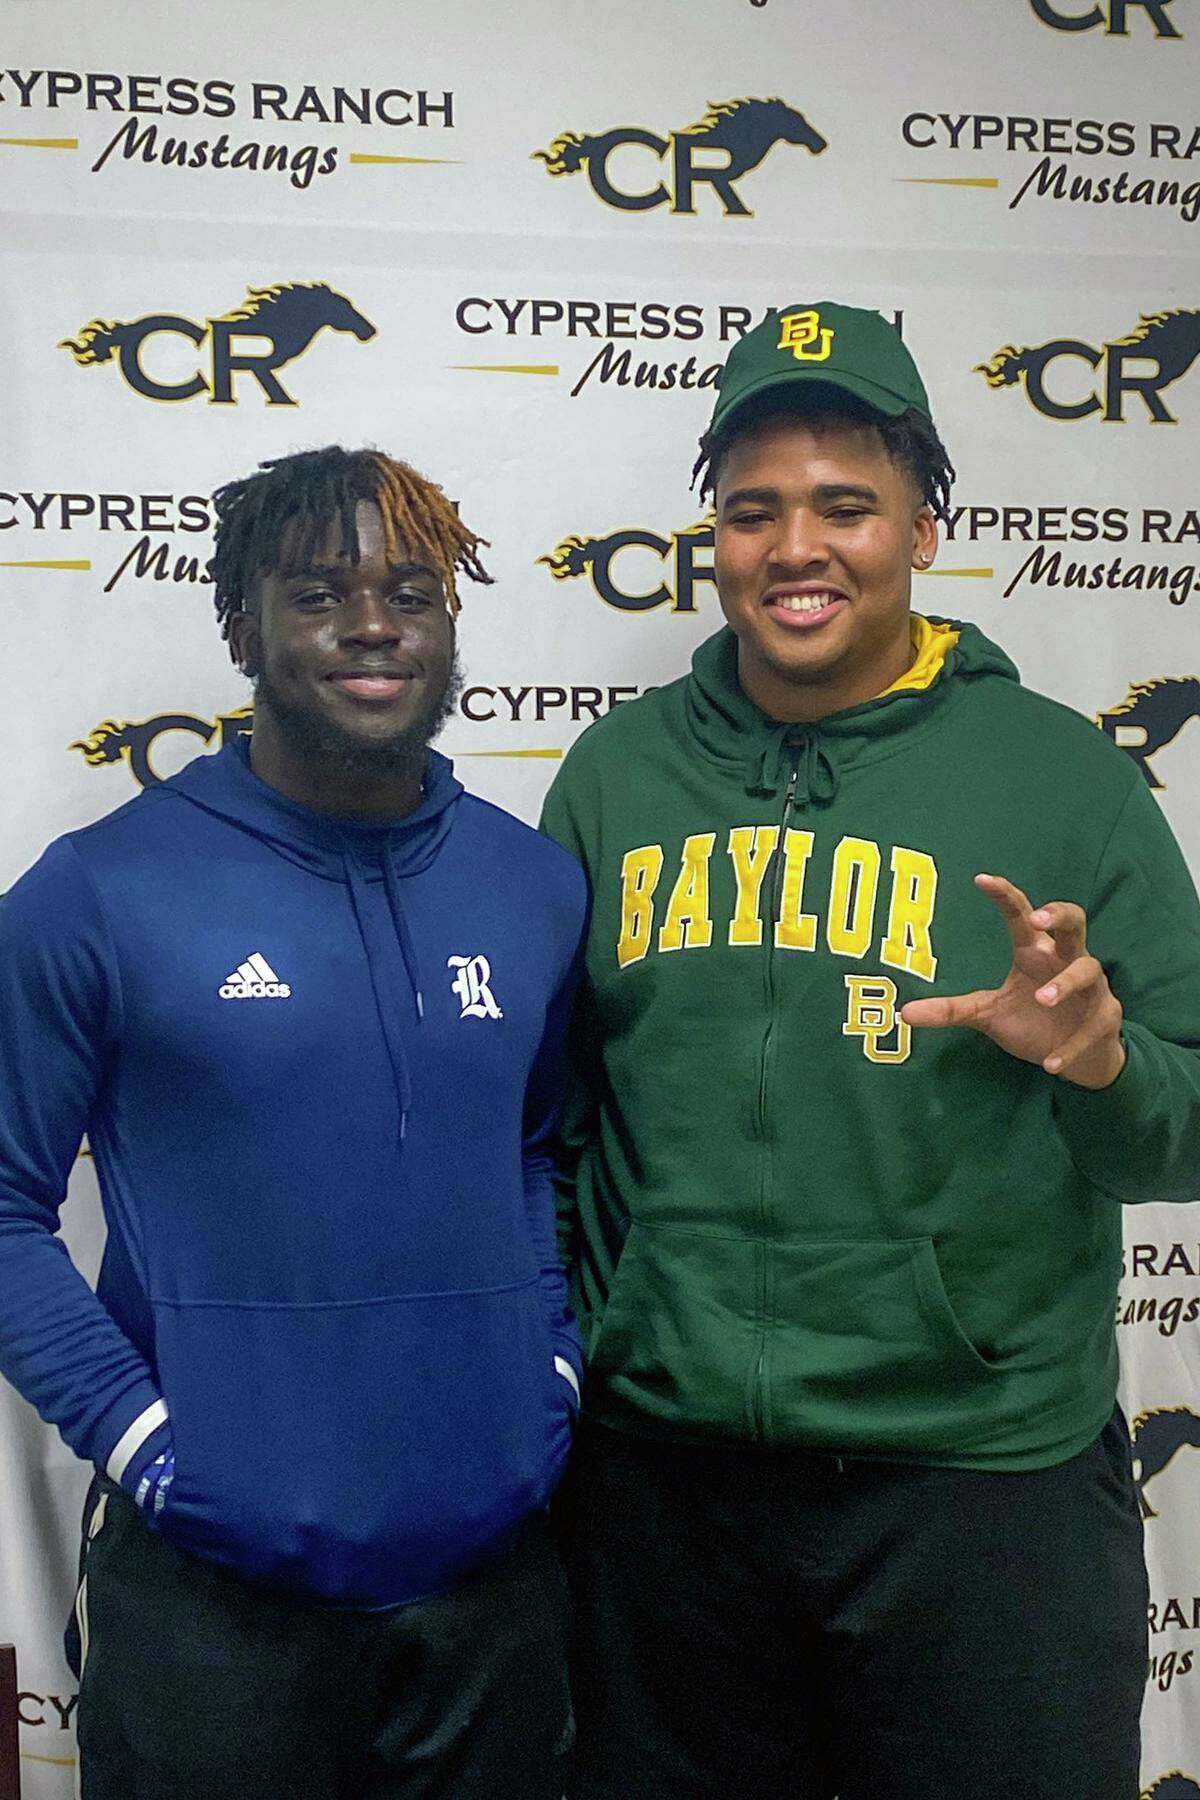 Cypress Ranch High School seniors Chibi Nwajuaku, left, and Bryce Simpson smile after signing their letters of intent to play college football on Dec. 15. Nwajuaku signed with Rice University and Simpson signed with Baylor University.